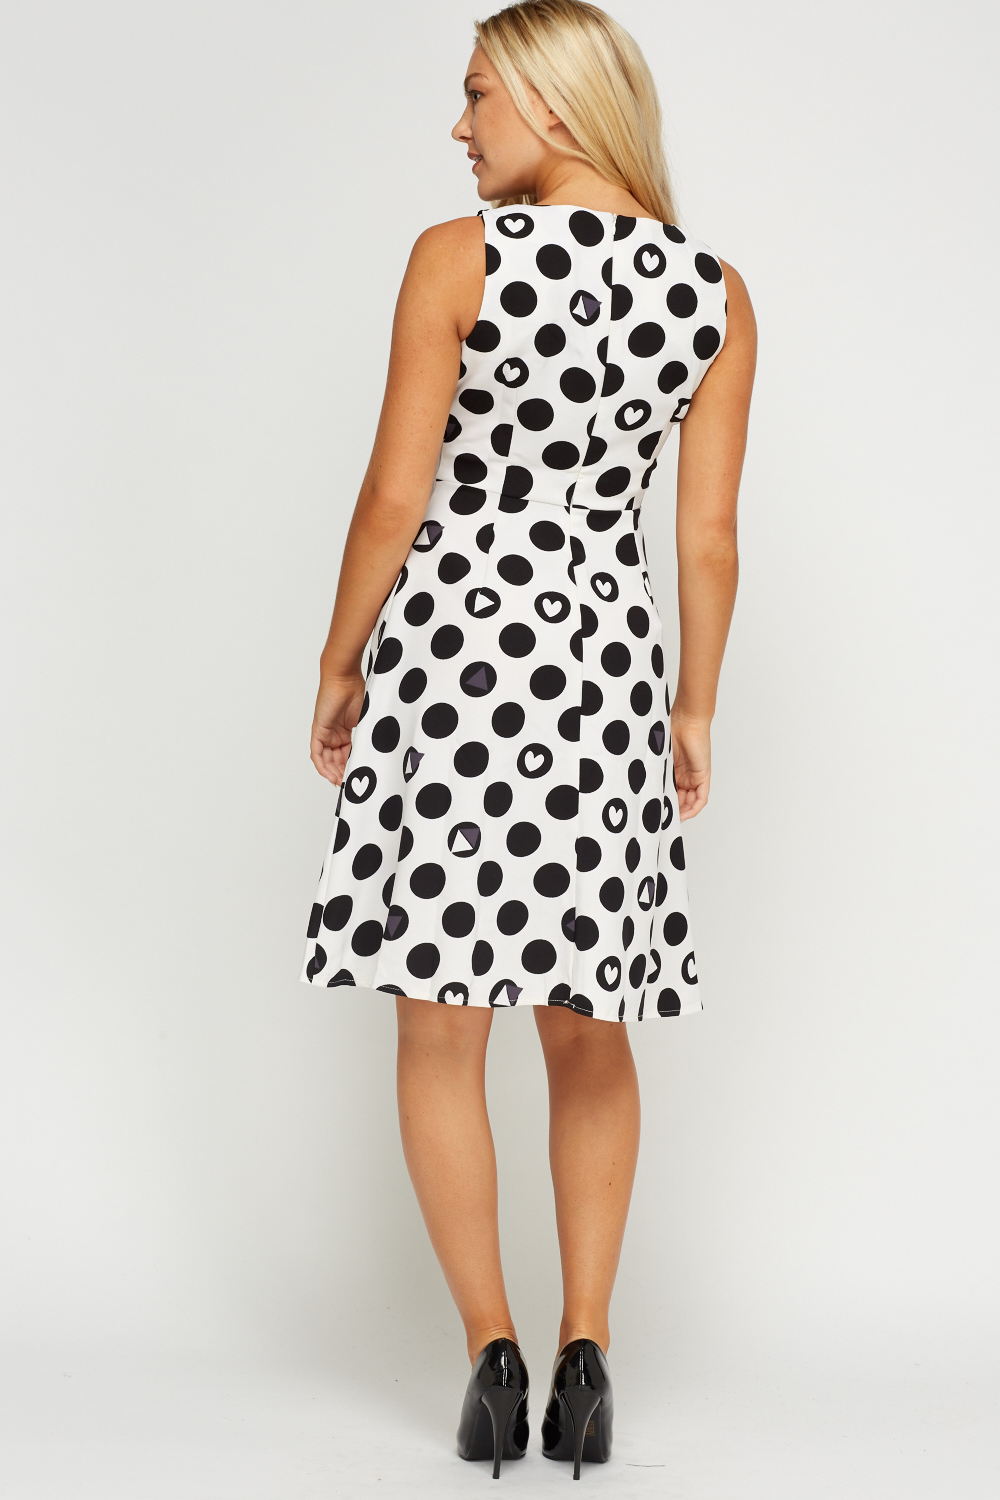 V-Neck Dotted Swing Dress - Just $7